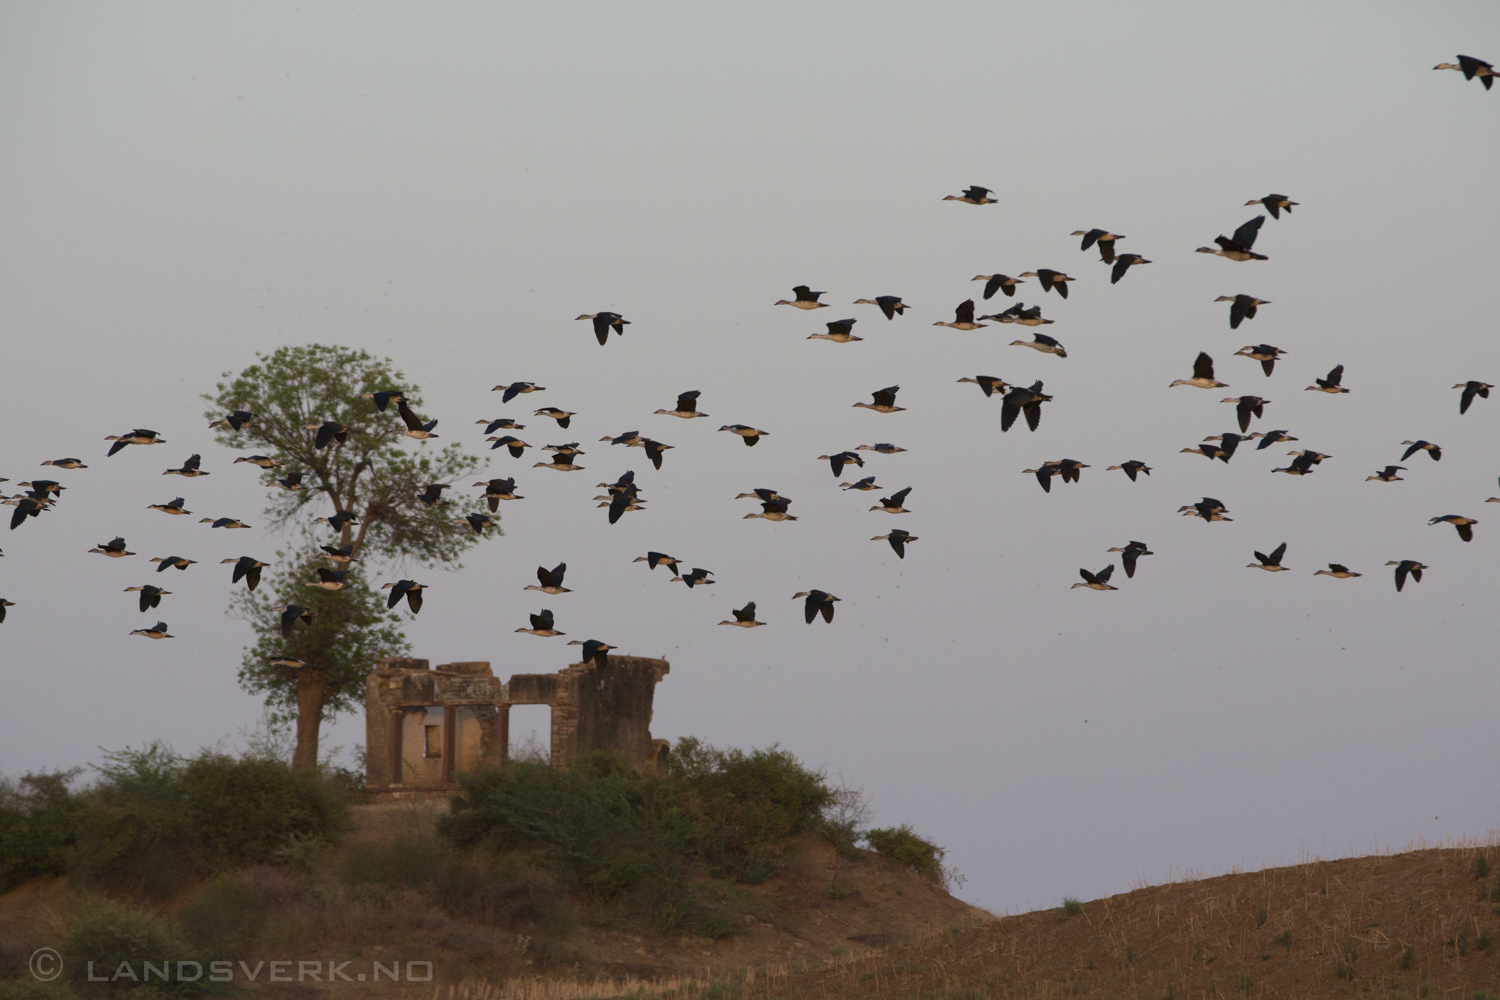 Ranthambore countryside, India. 

(Canon EOS 5D Mark III / Canon EF 70-200mm f/2.8 L IS II USM / Canon 2x EF Extender III)